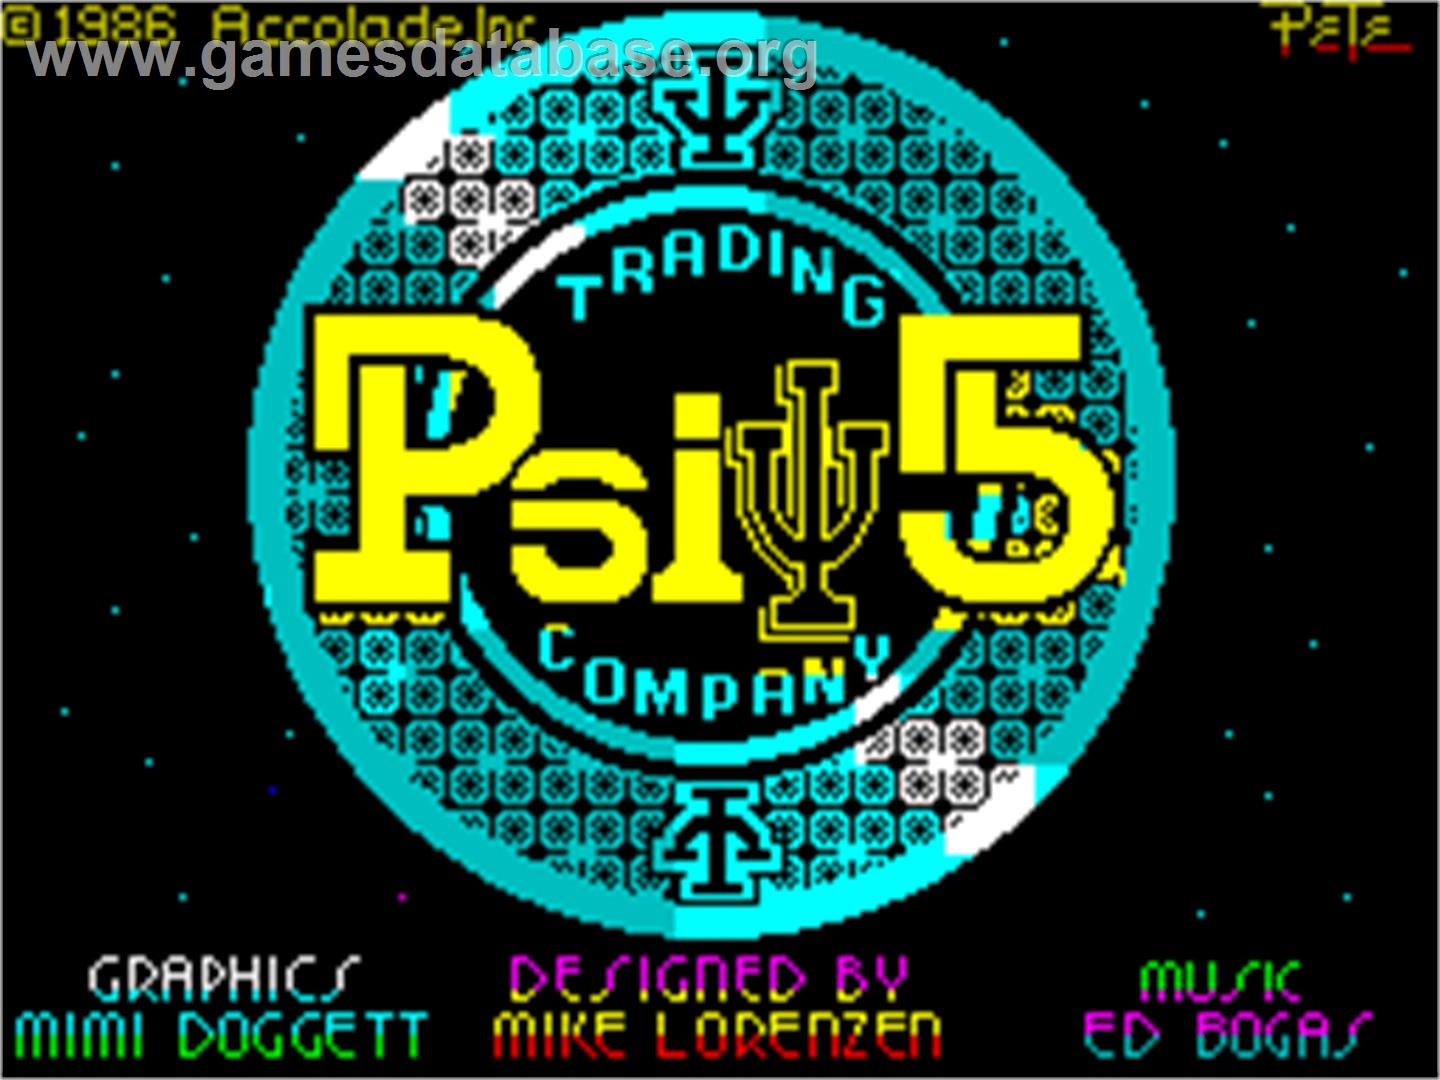 Psi-5 Trading Company - Sinclair ZX Spectrum - Artwork - Title Screen